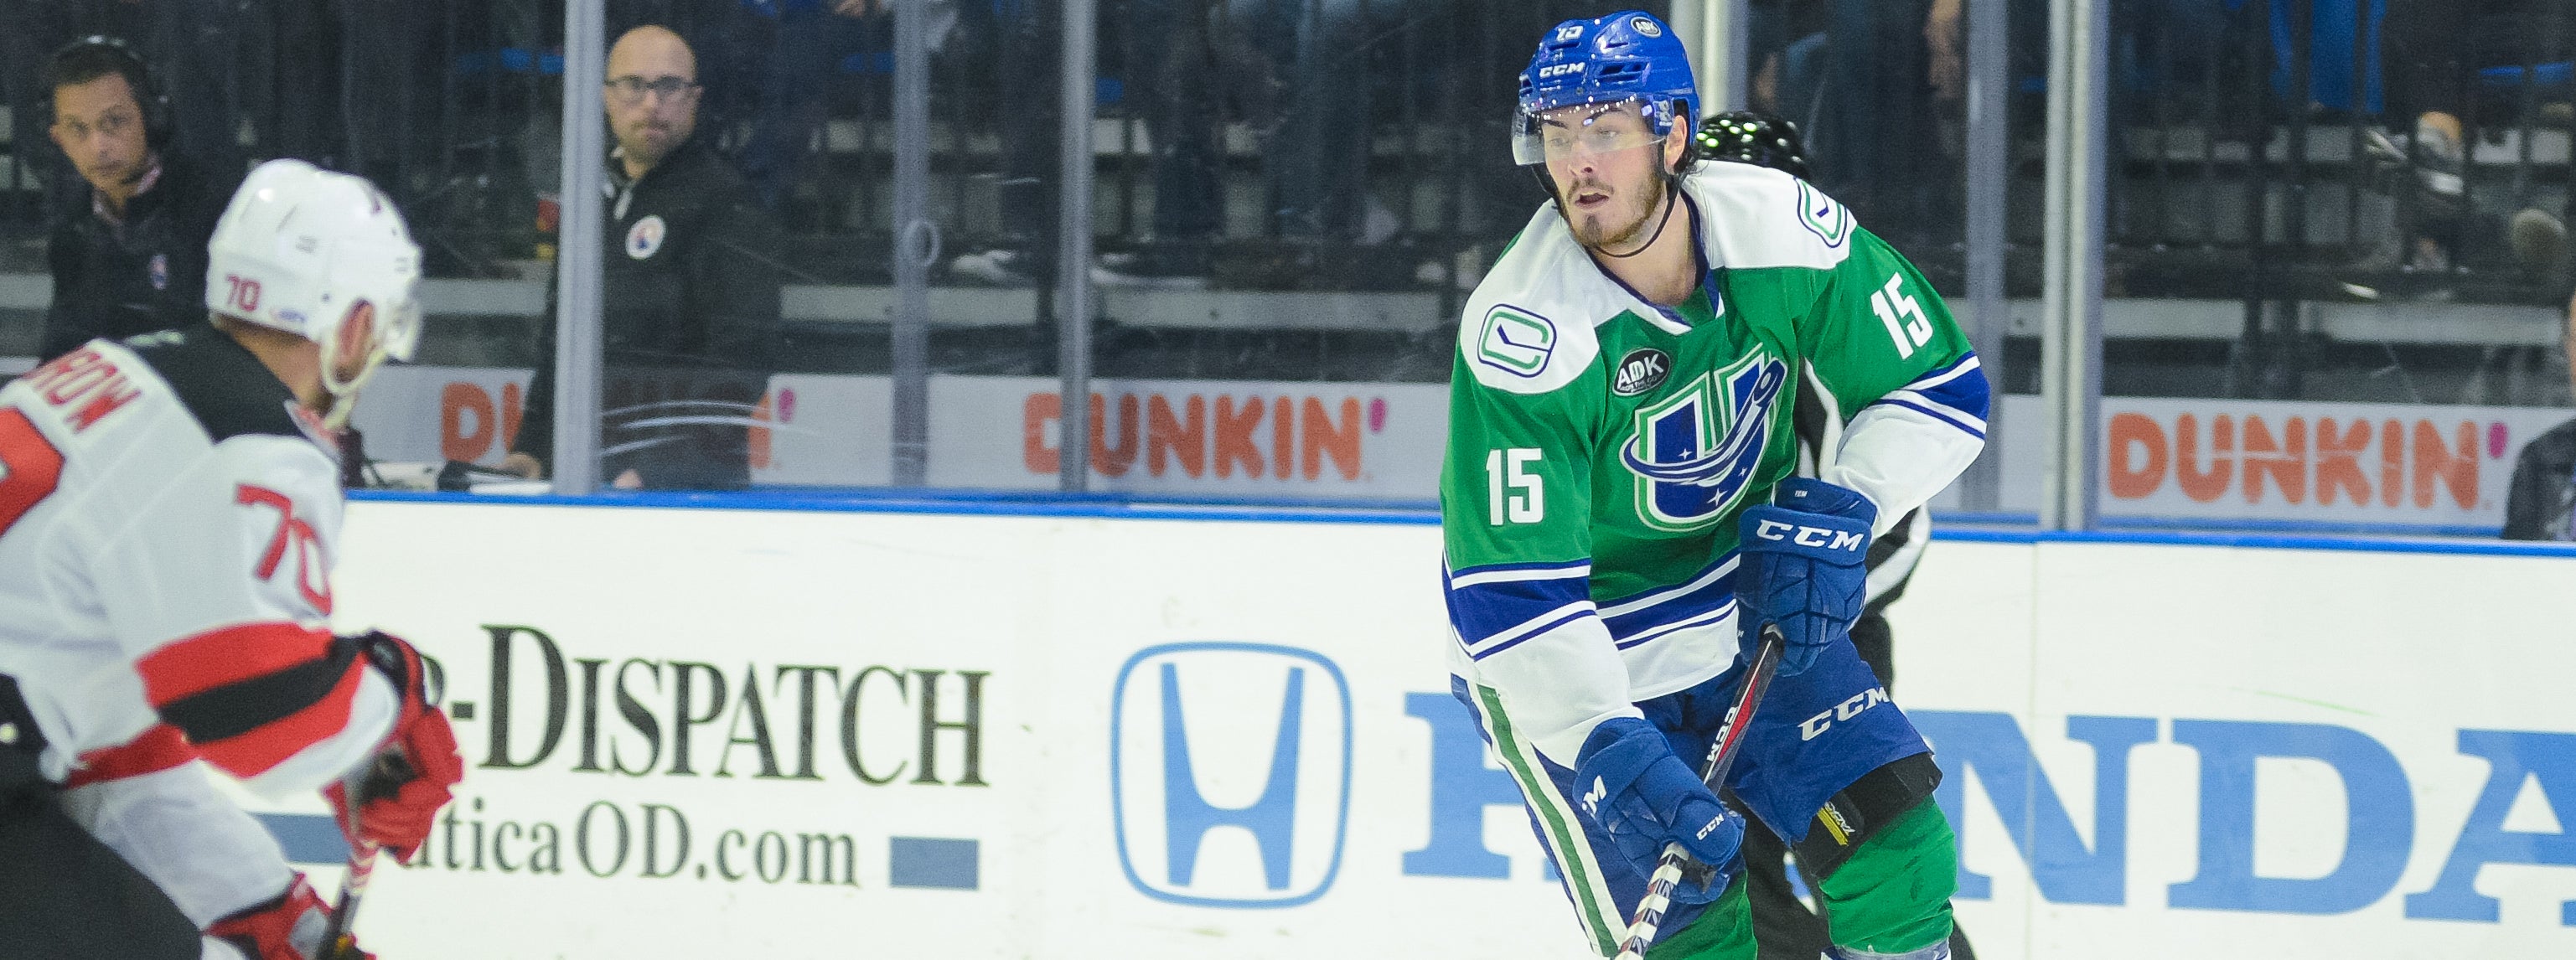 COMETS TAKE ON DEVILS FOR SECOND TIME THIS WEEK